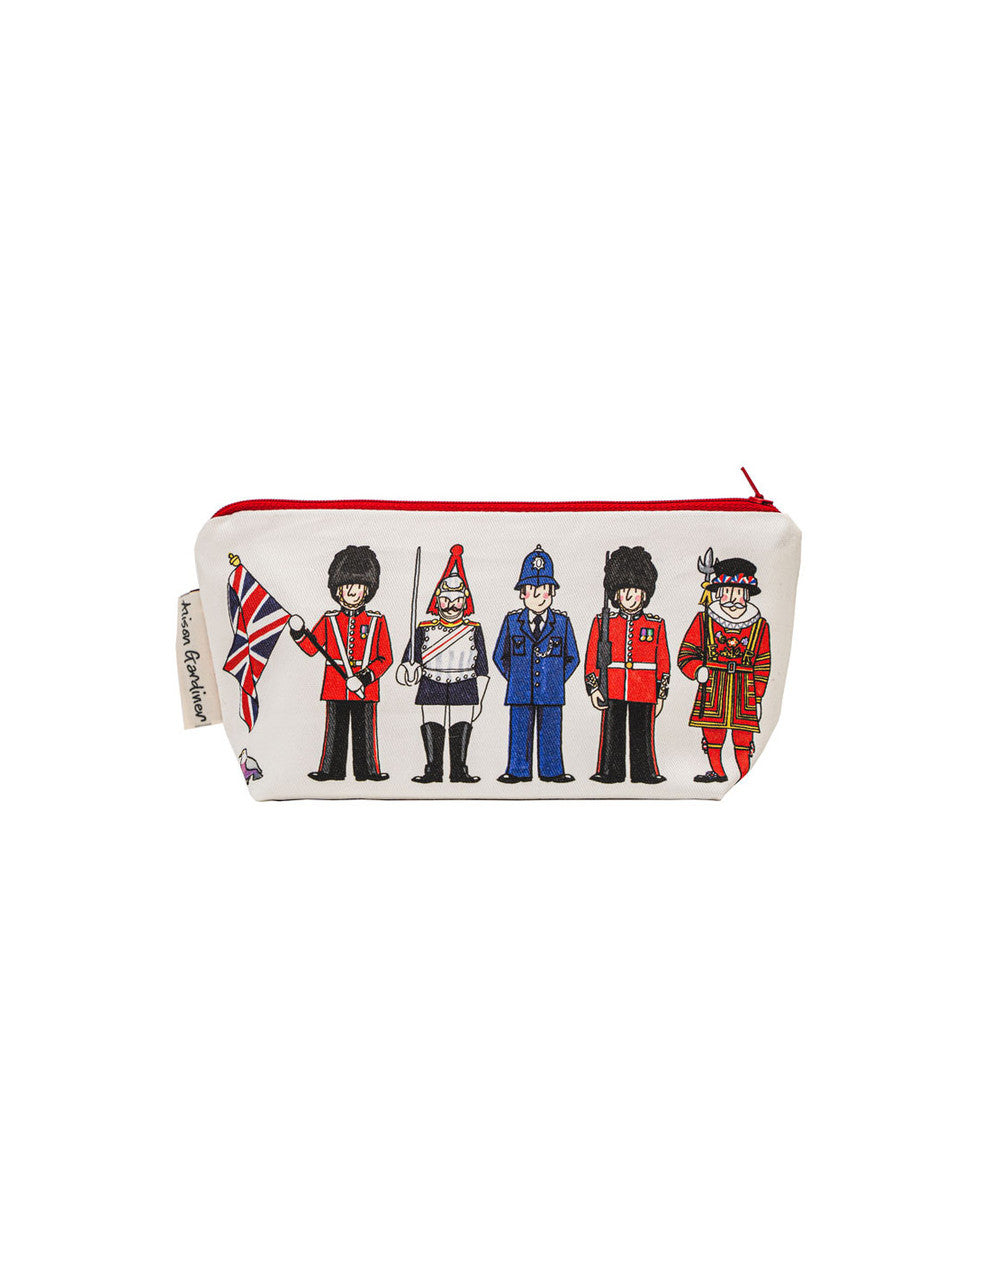 London Figures cosmetic bag/pencil case from Alison Gardiner.